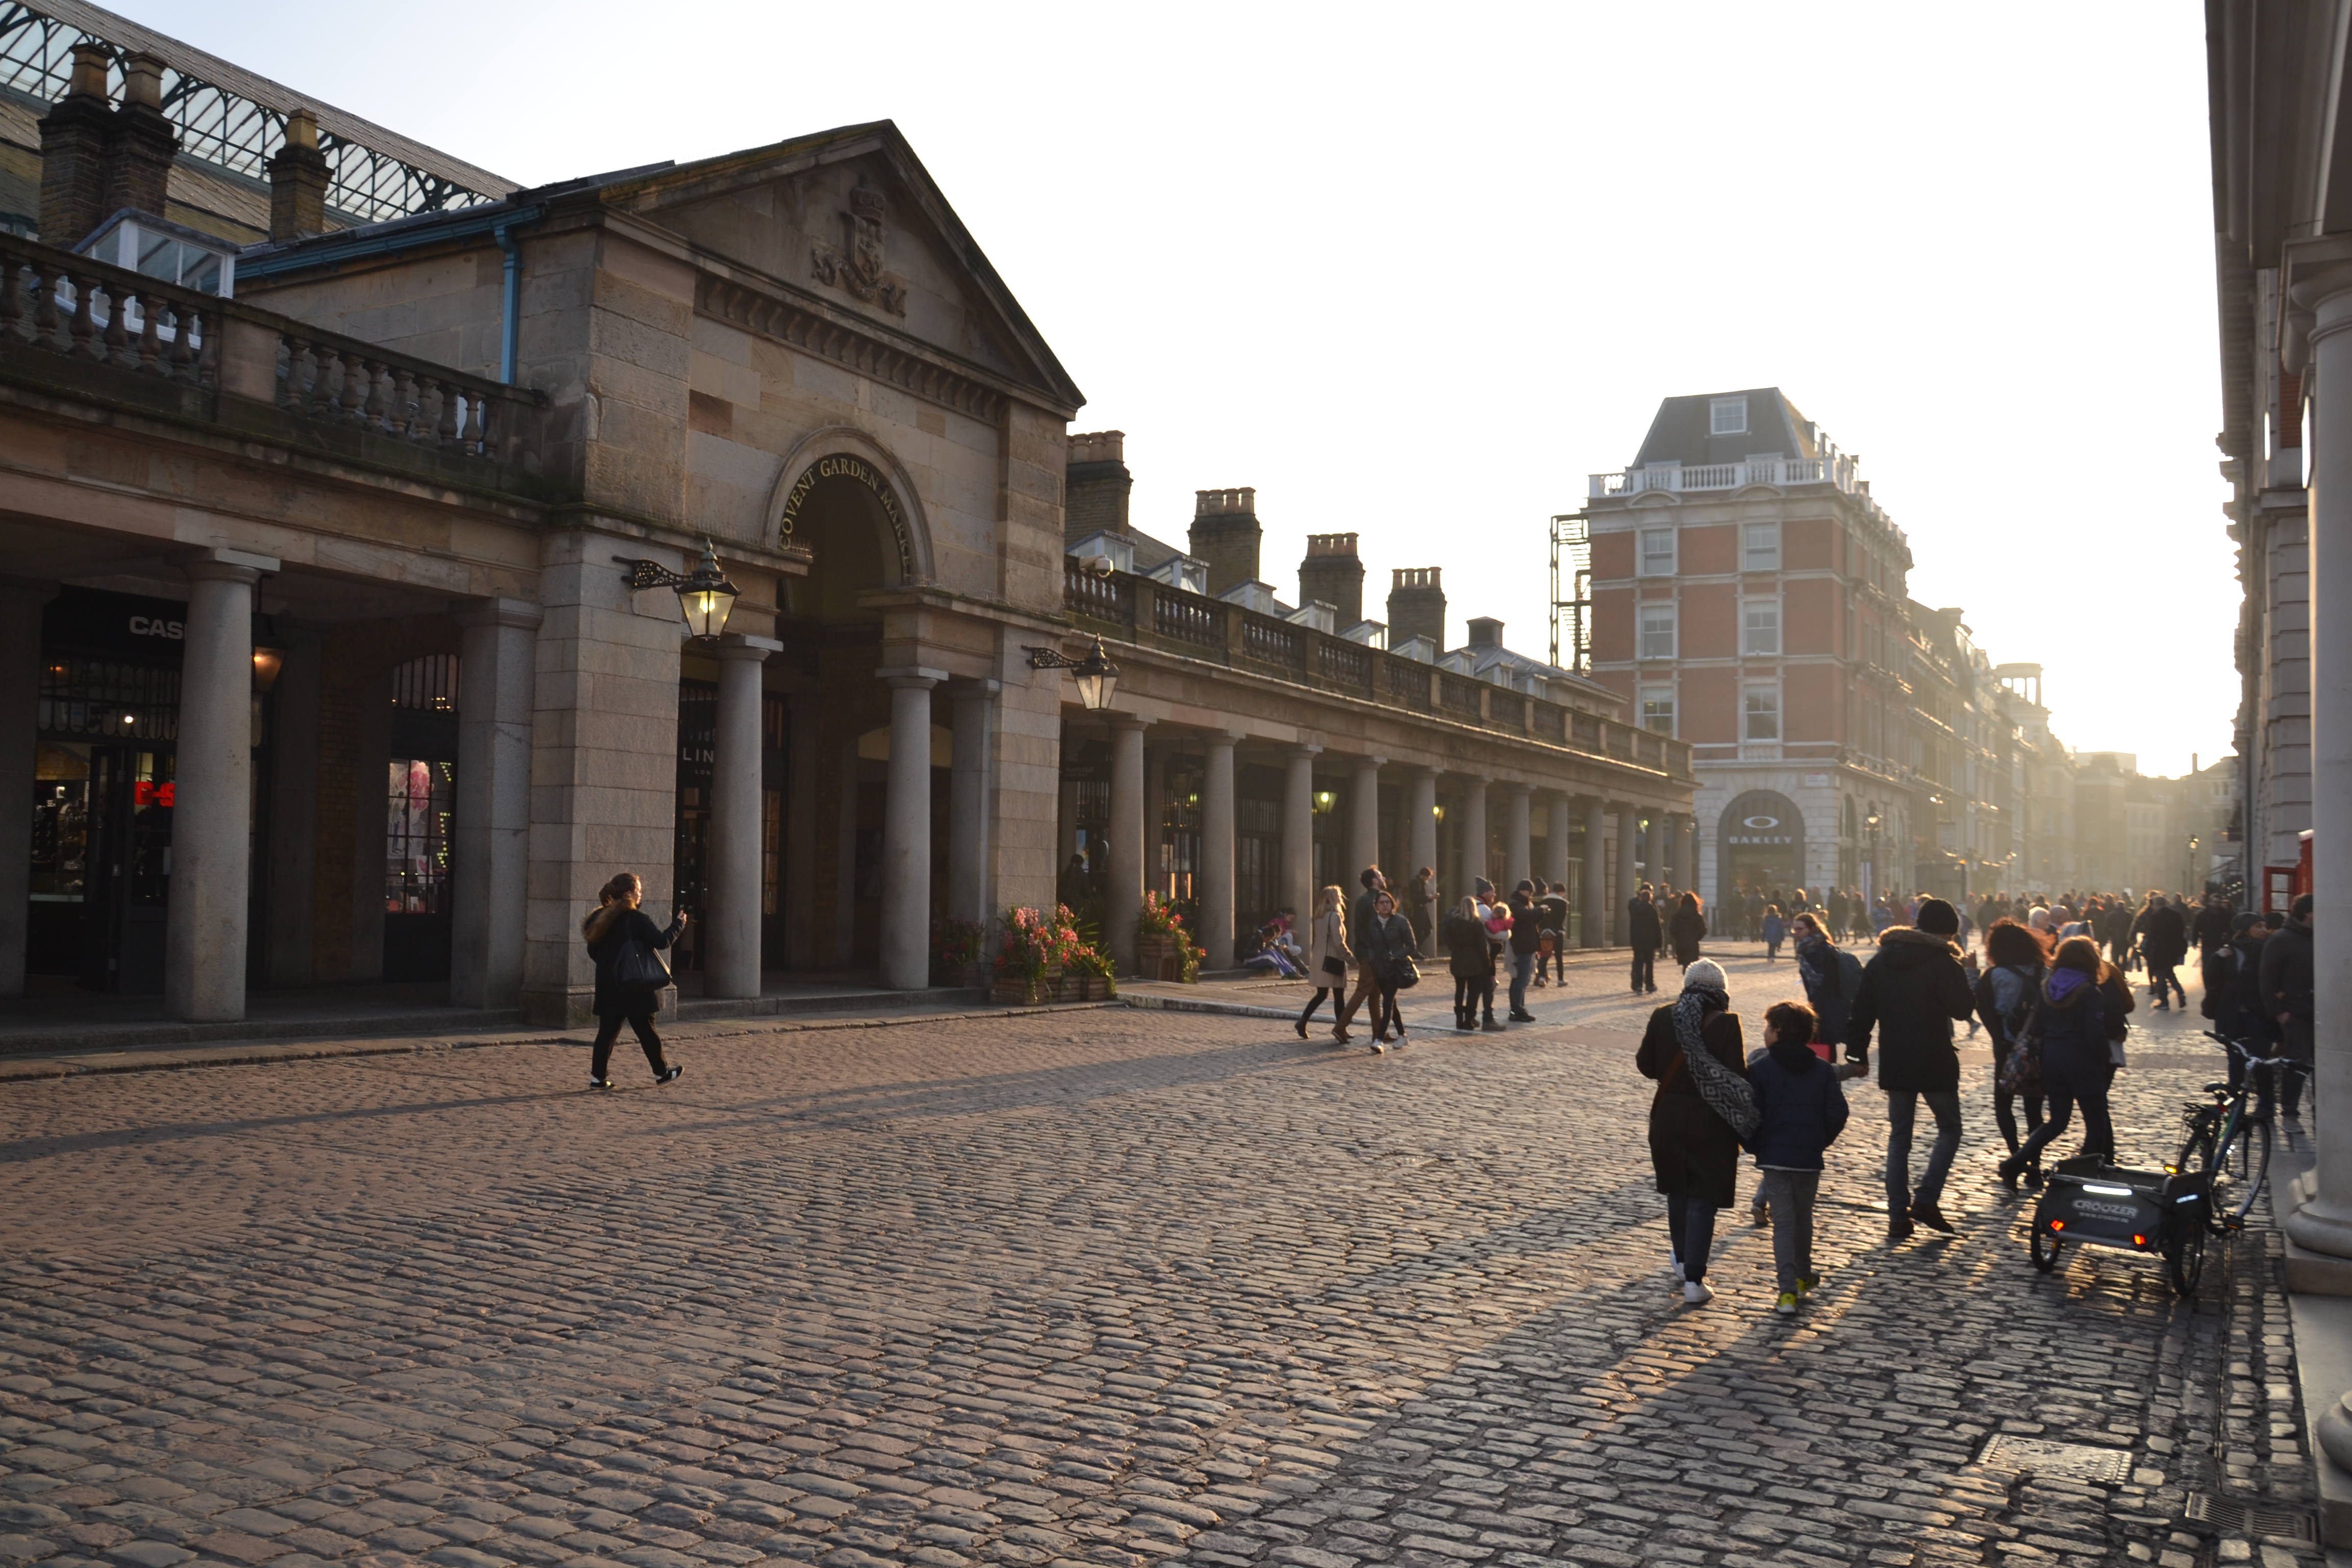 Covent Garden Piazza | London, England Attractions - Lonely Planet